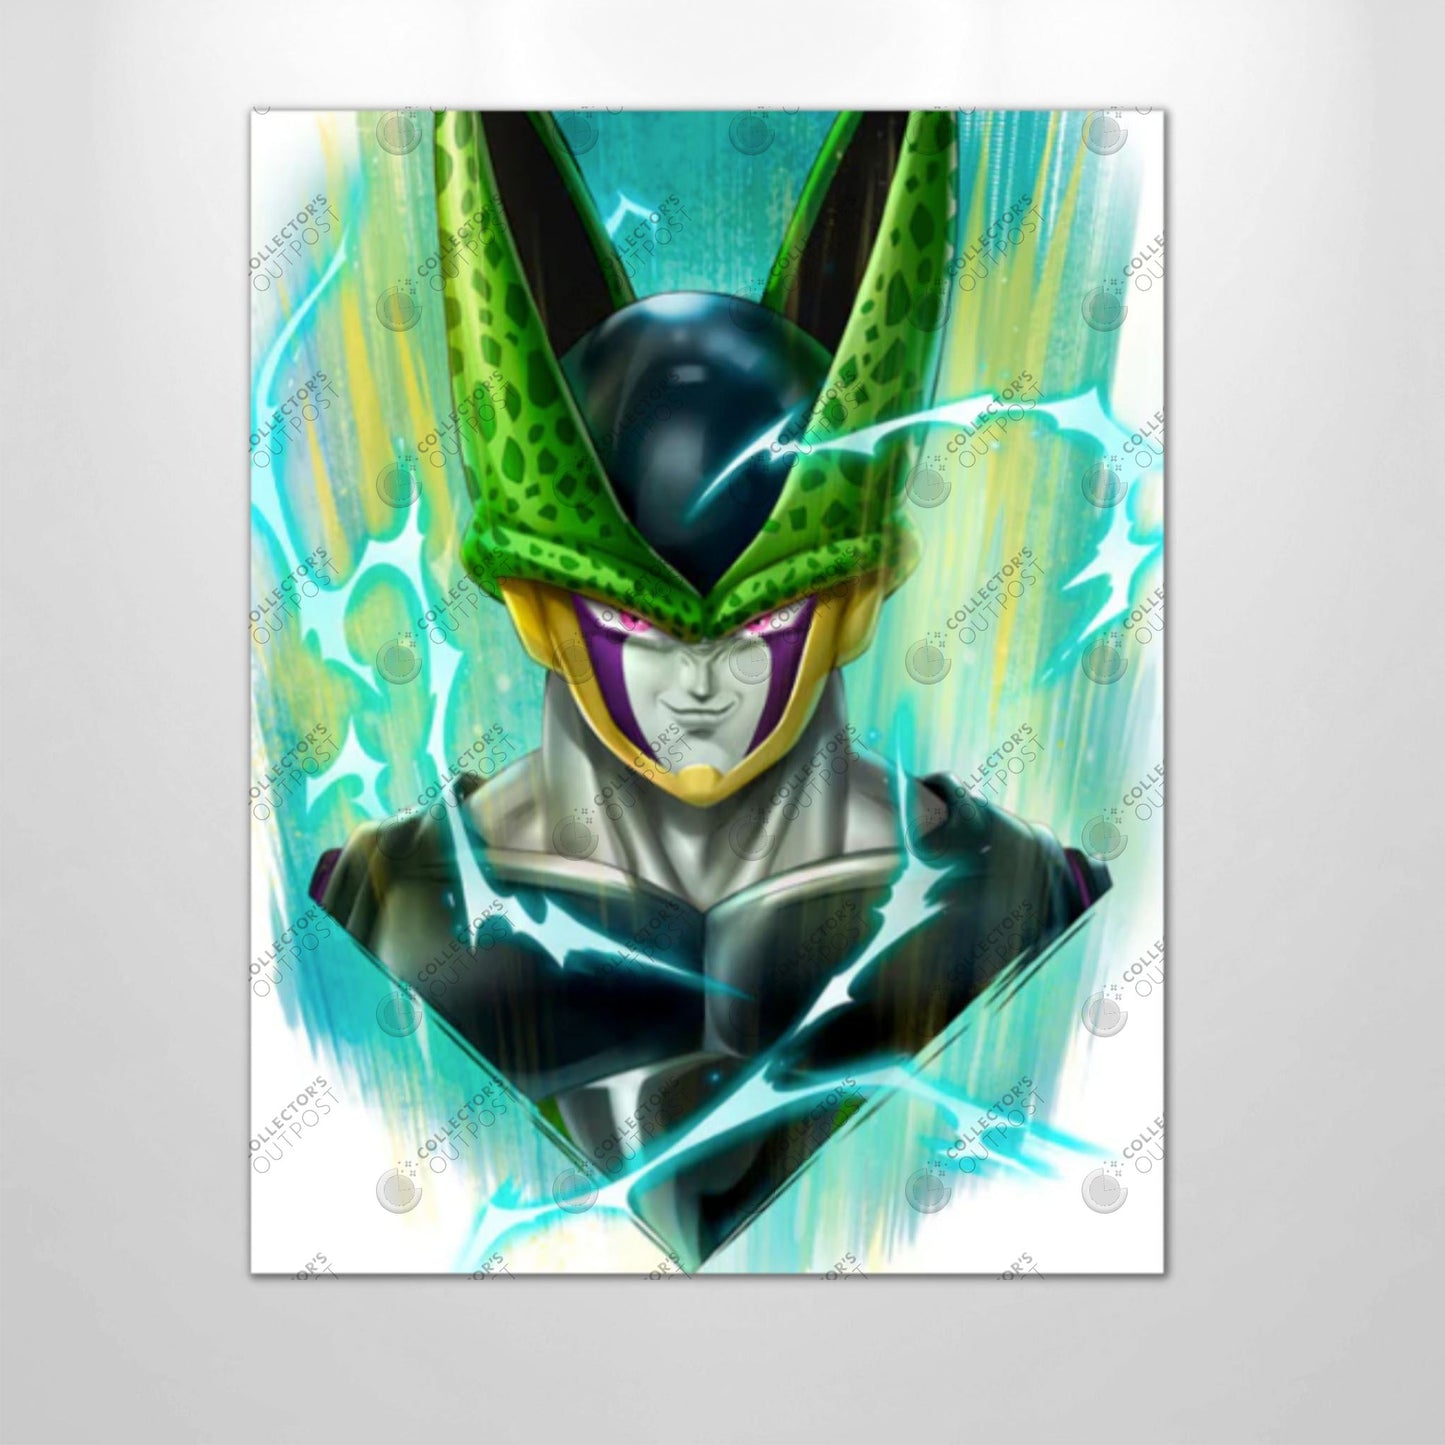 Cell "Stages of Perfection" (Dragon Ball Z) Legacy Portrait Art Print